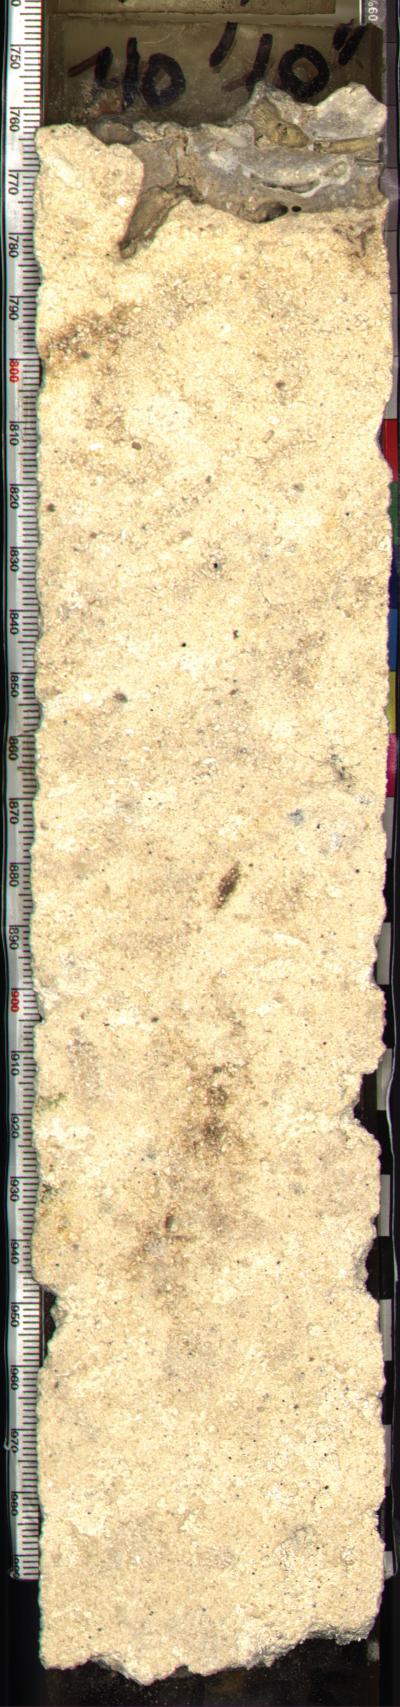 Example of Subaerial Exposure Surface from Clino